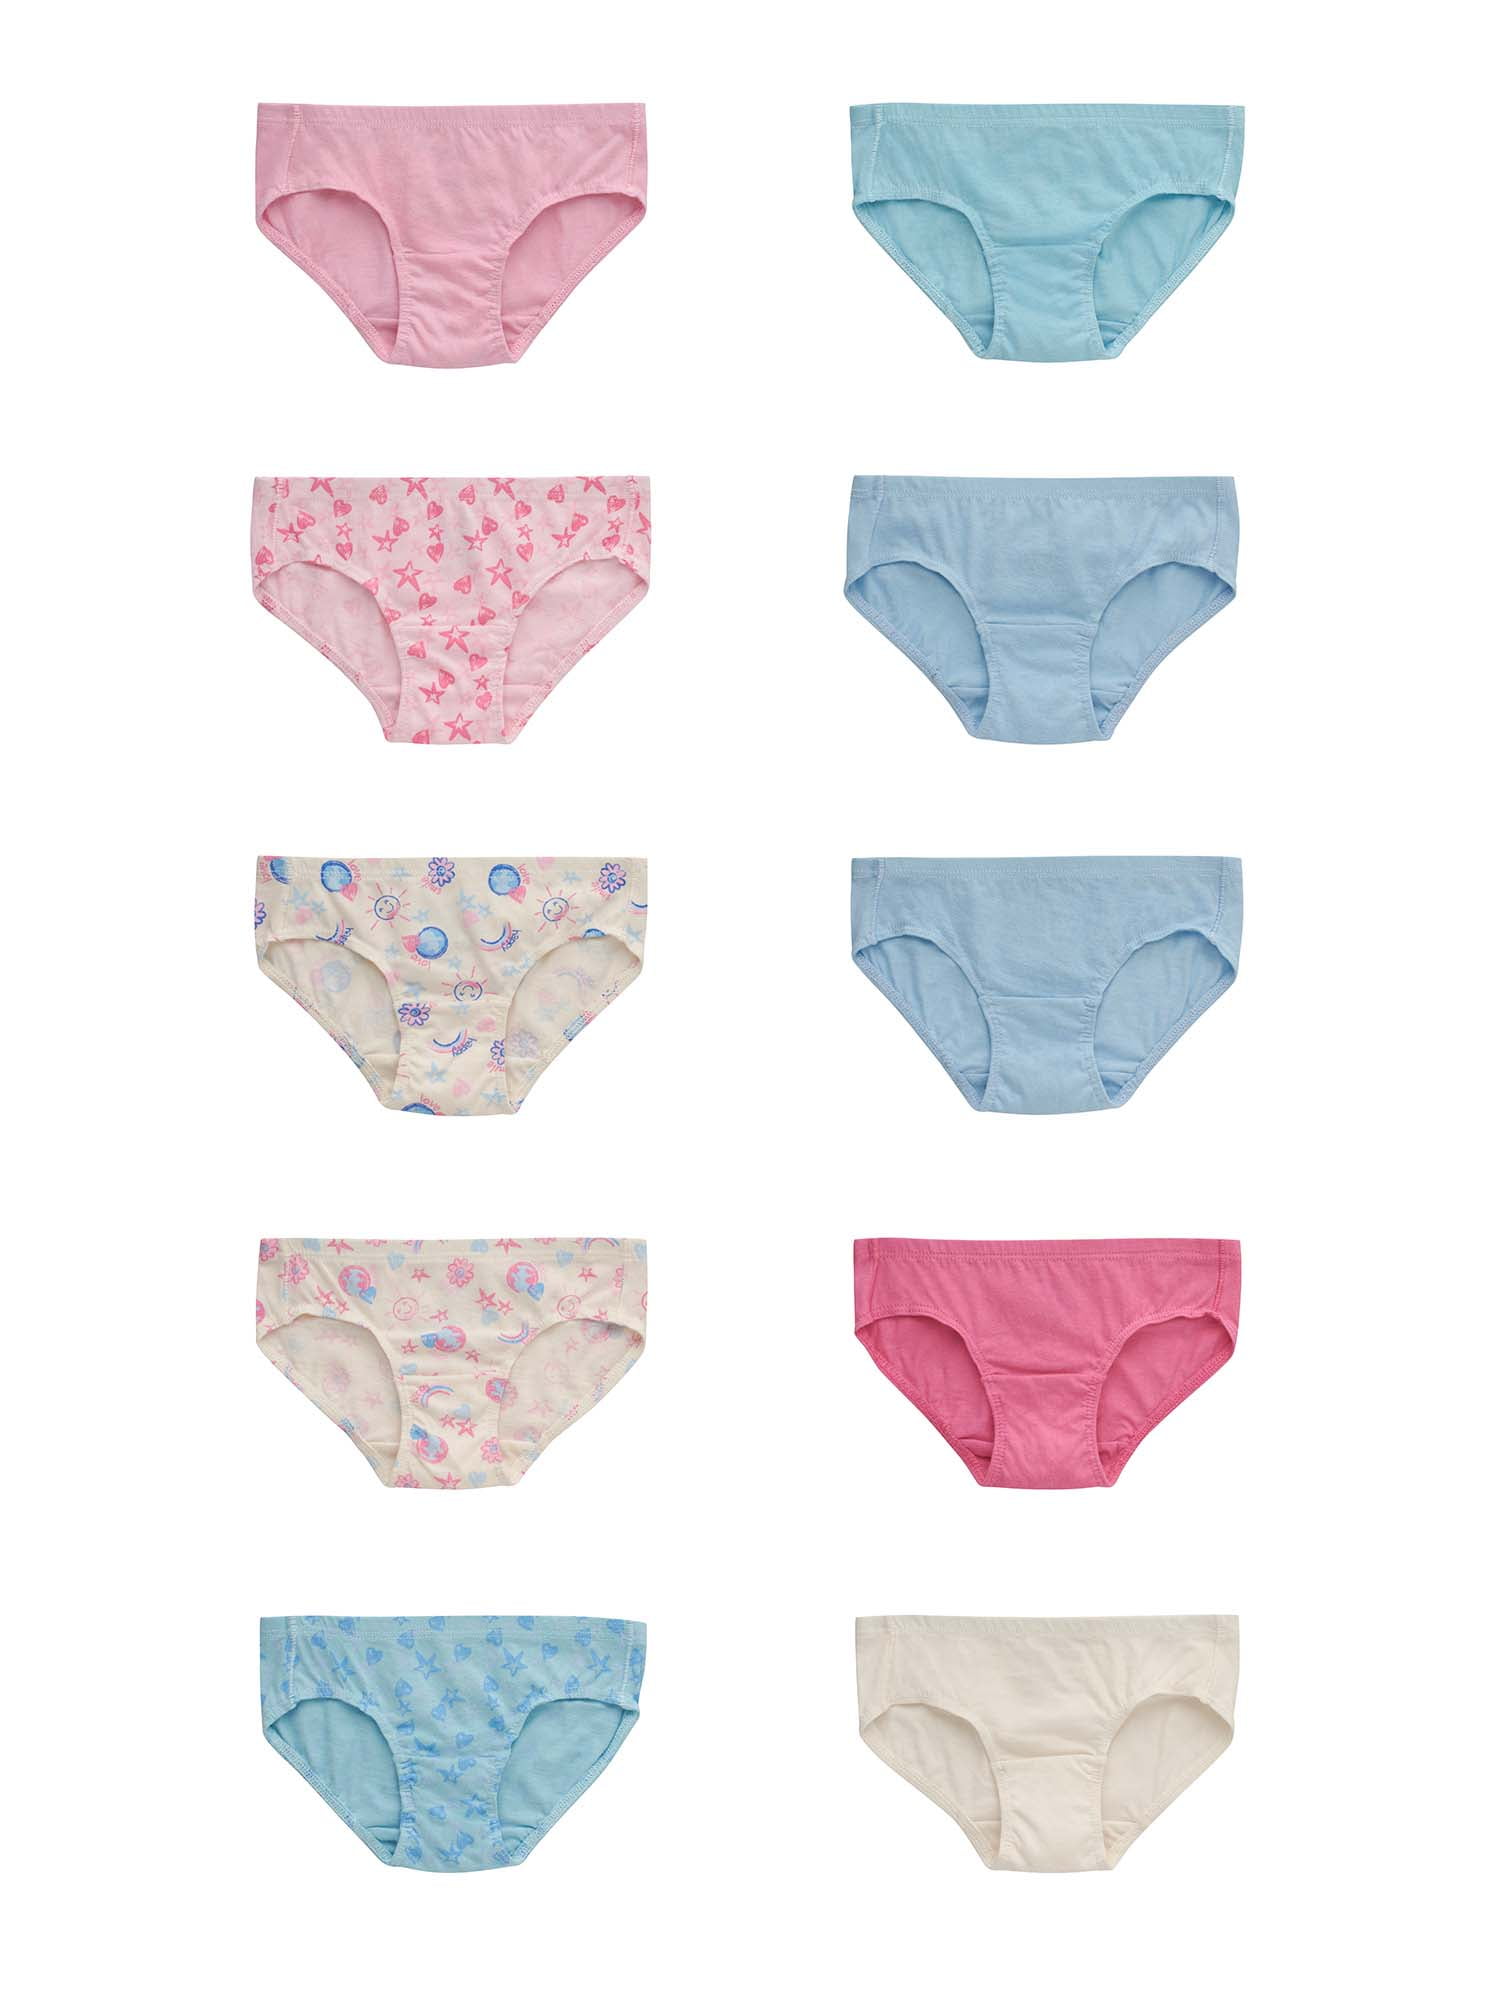 Hanes Toddler Girls' 10pk Pure Comfort Hipster Briefs - Colors May